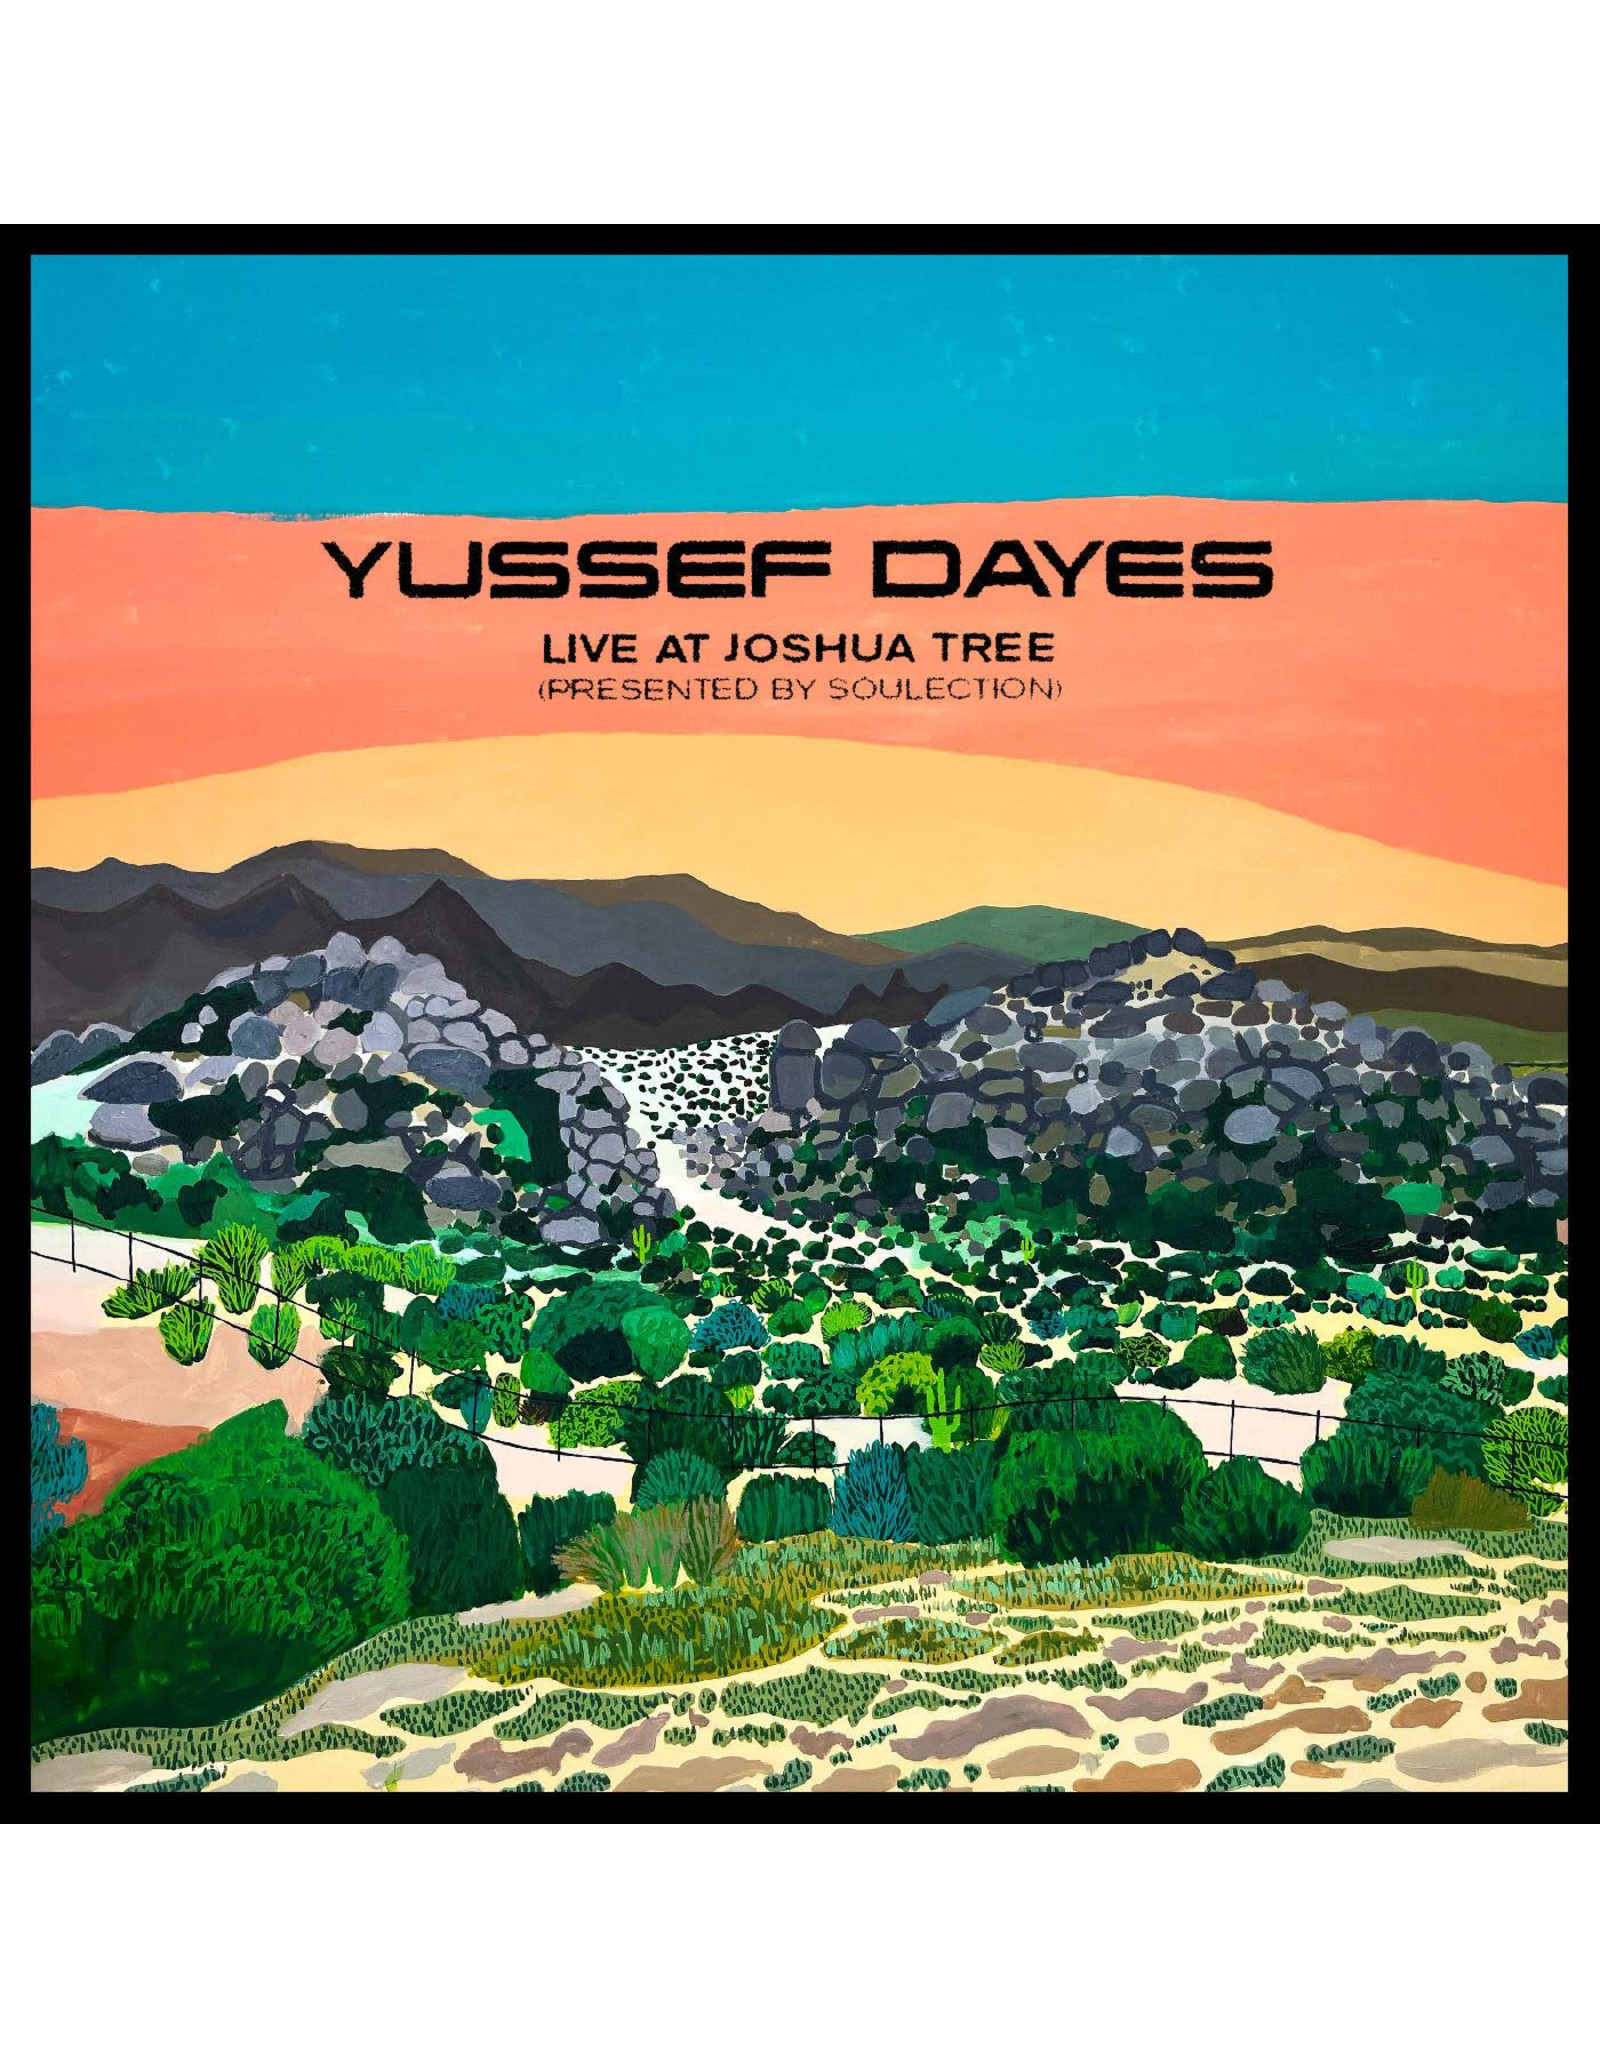 Yussef Dayes - The Yussef Dayes Experience Live at Joshua Tree (Exclusive Vinyl)